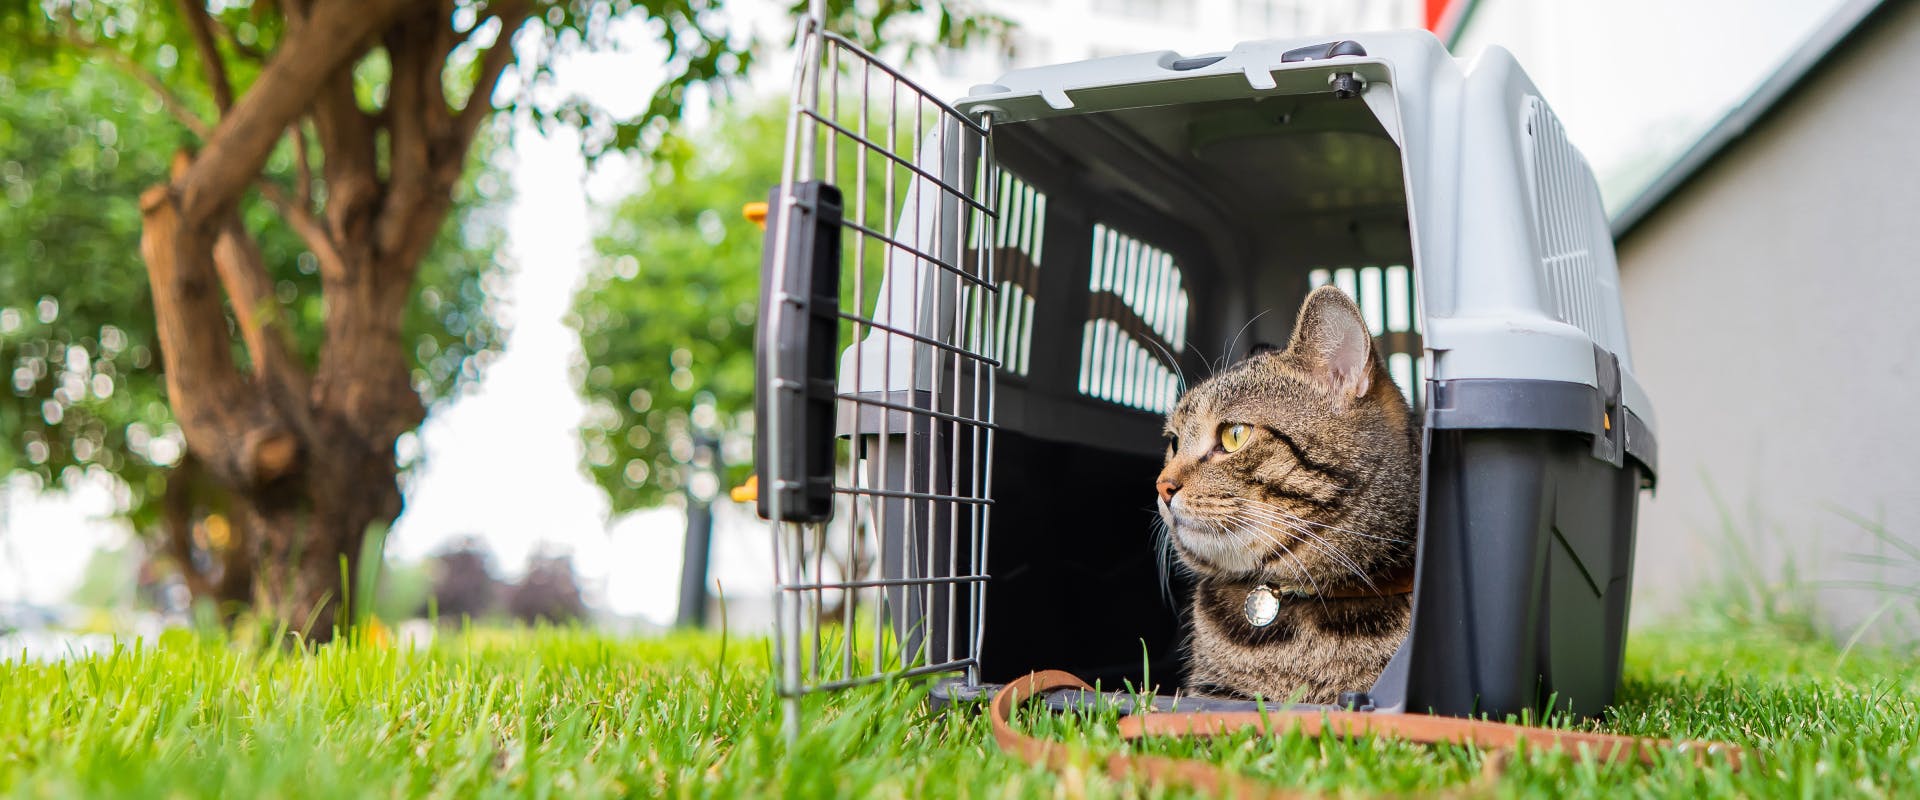 a tabby cat sitting in a cat carrier outside